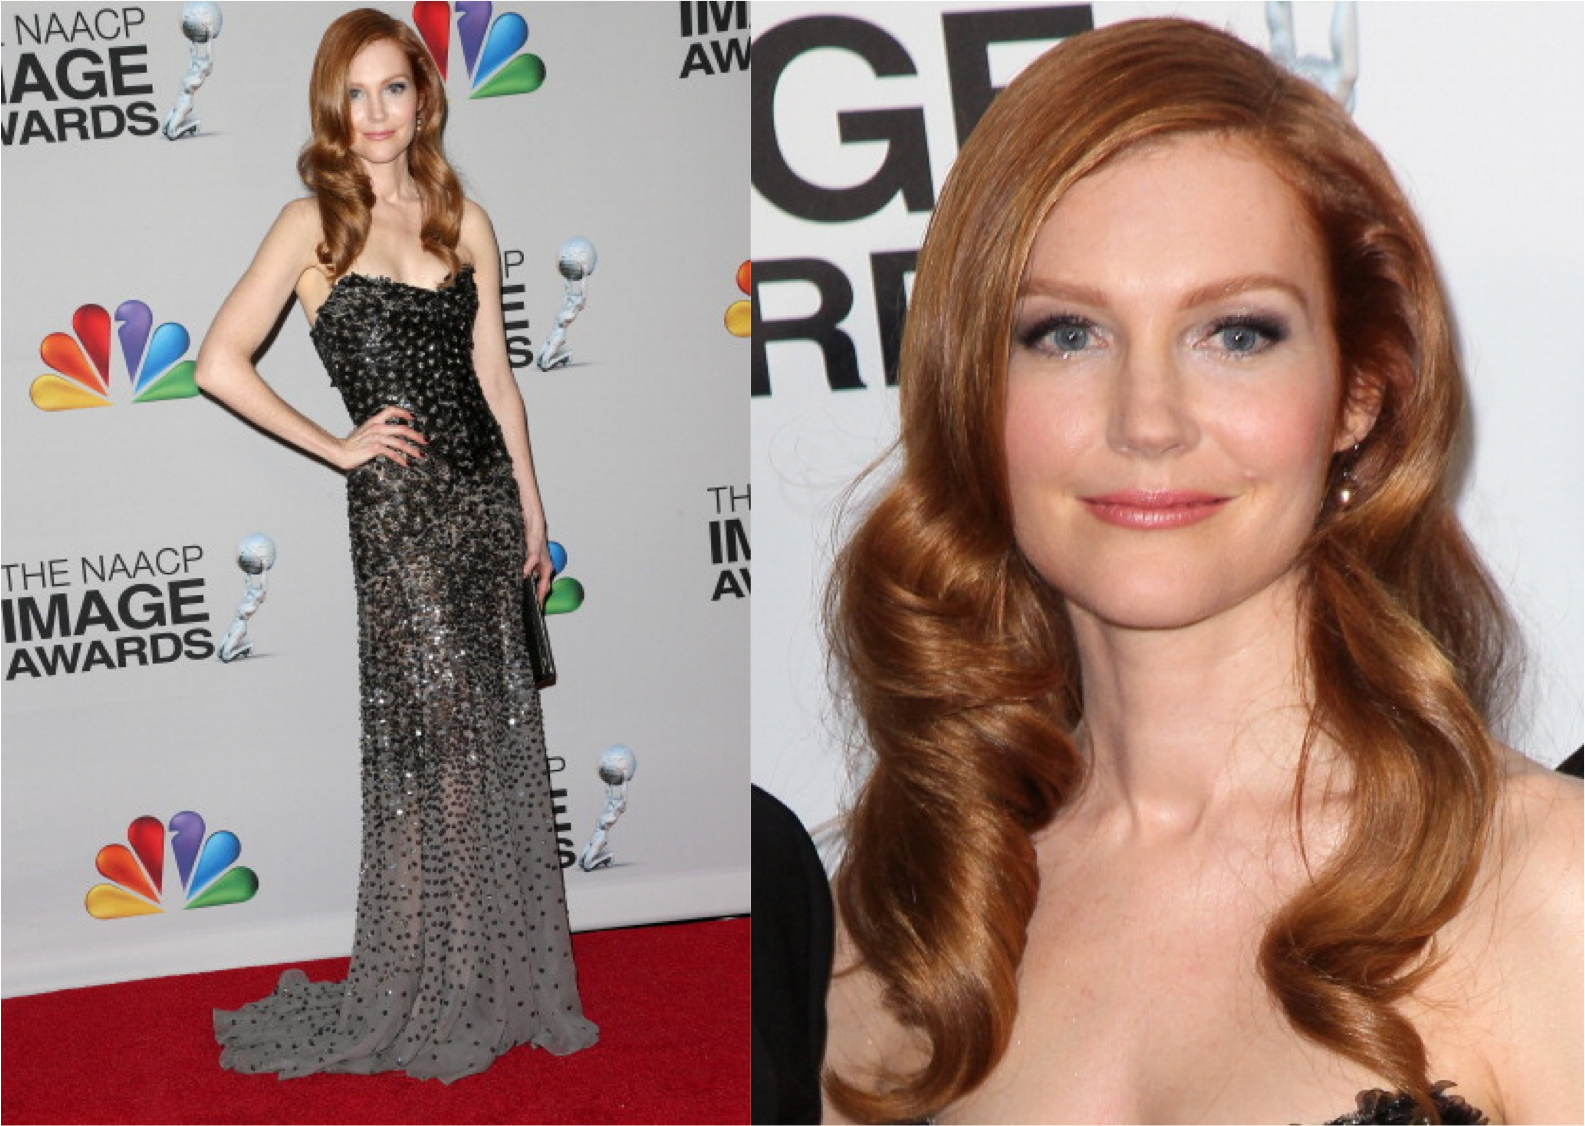 Darby Stanchfield in Donna Karan at 2013 NAACP Image Awards 10